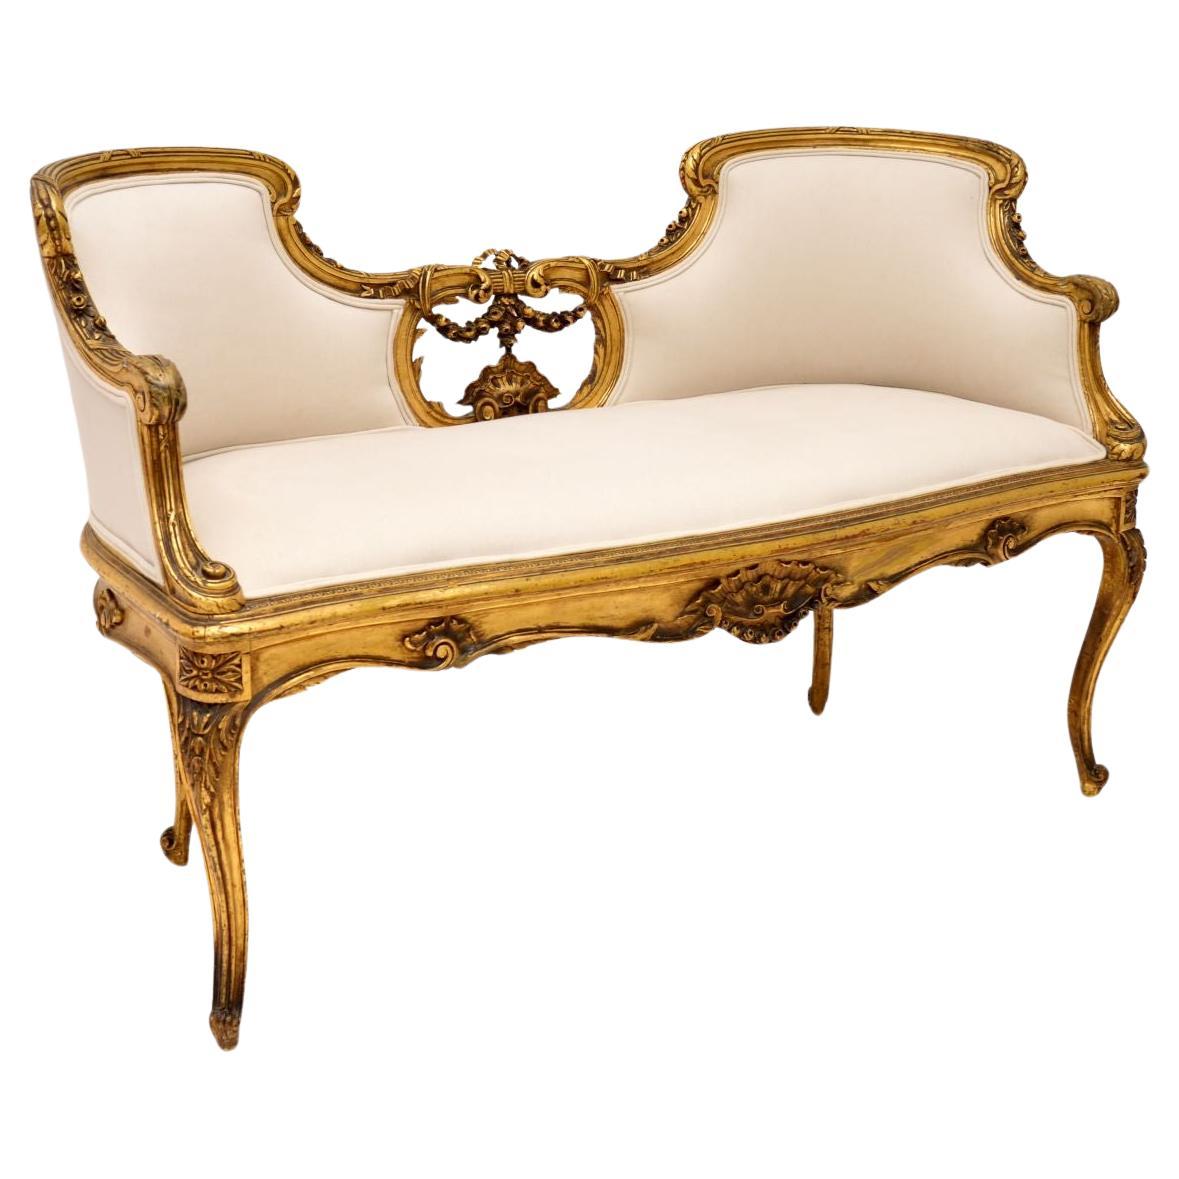 Antique French Carved Gilt Wood Settee